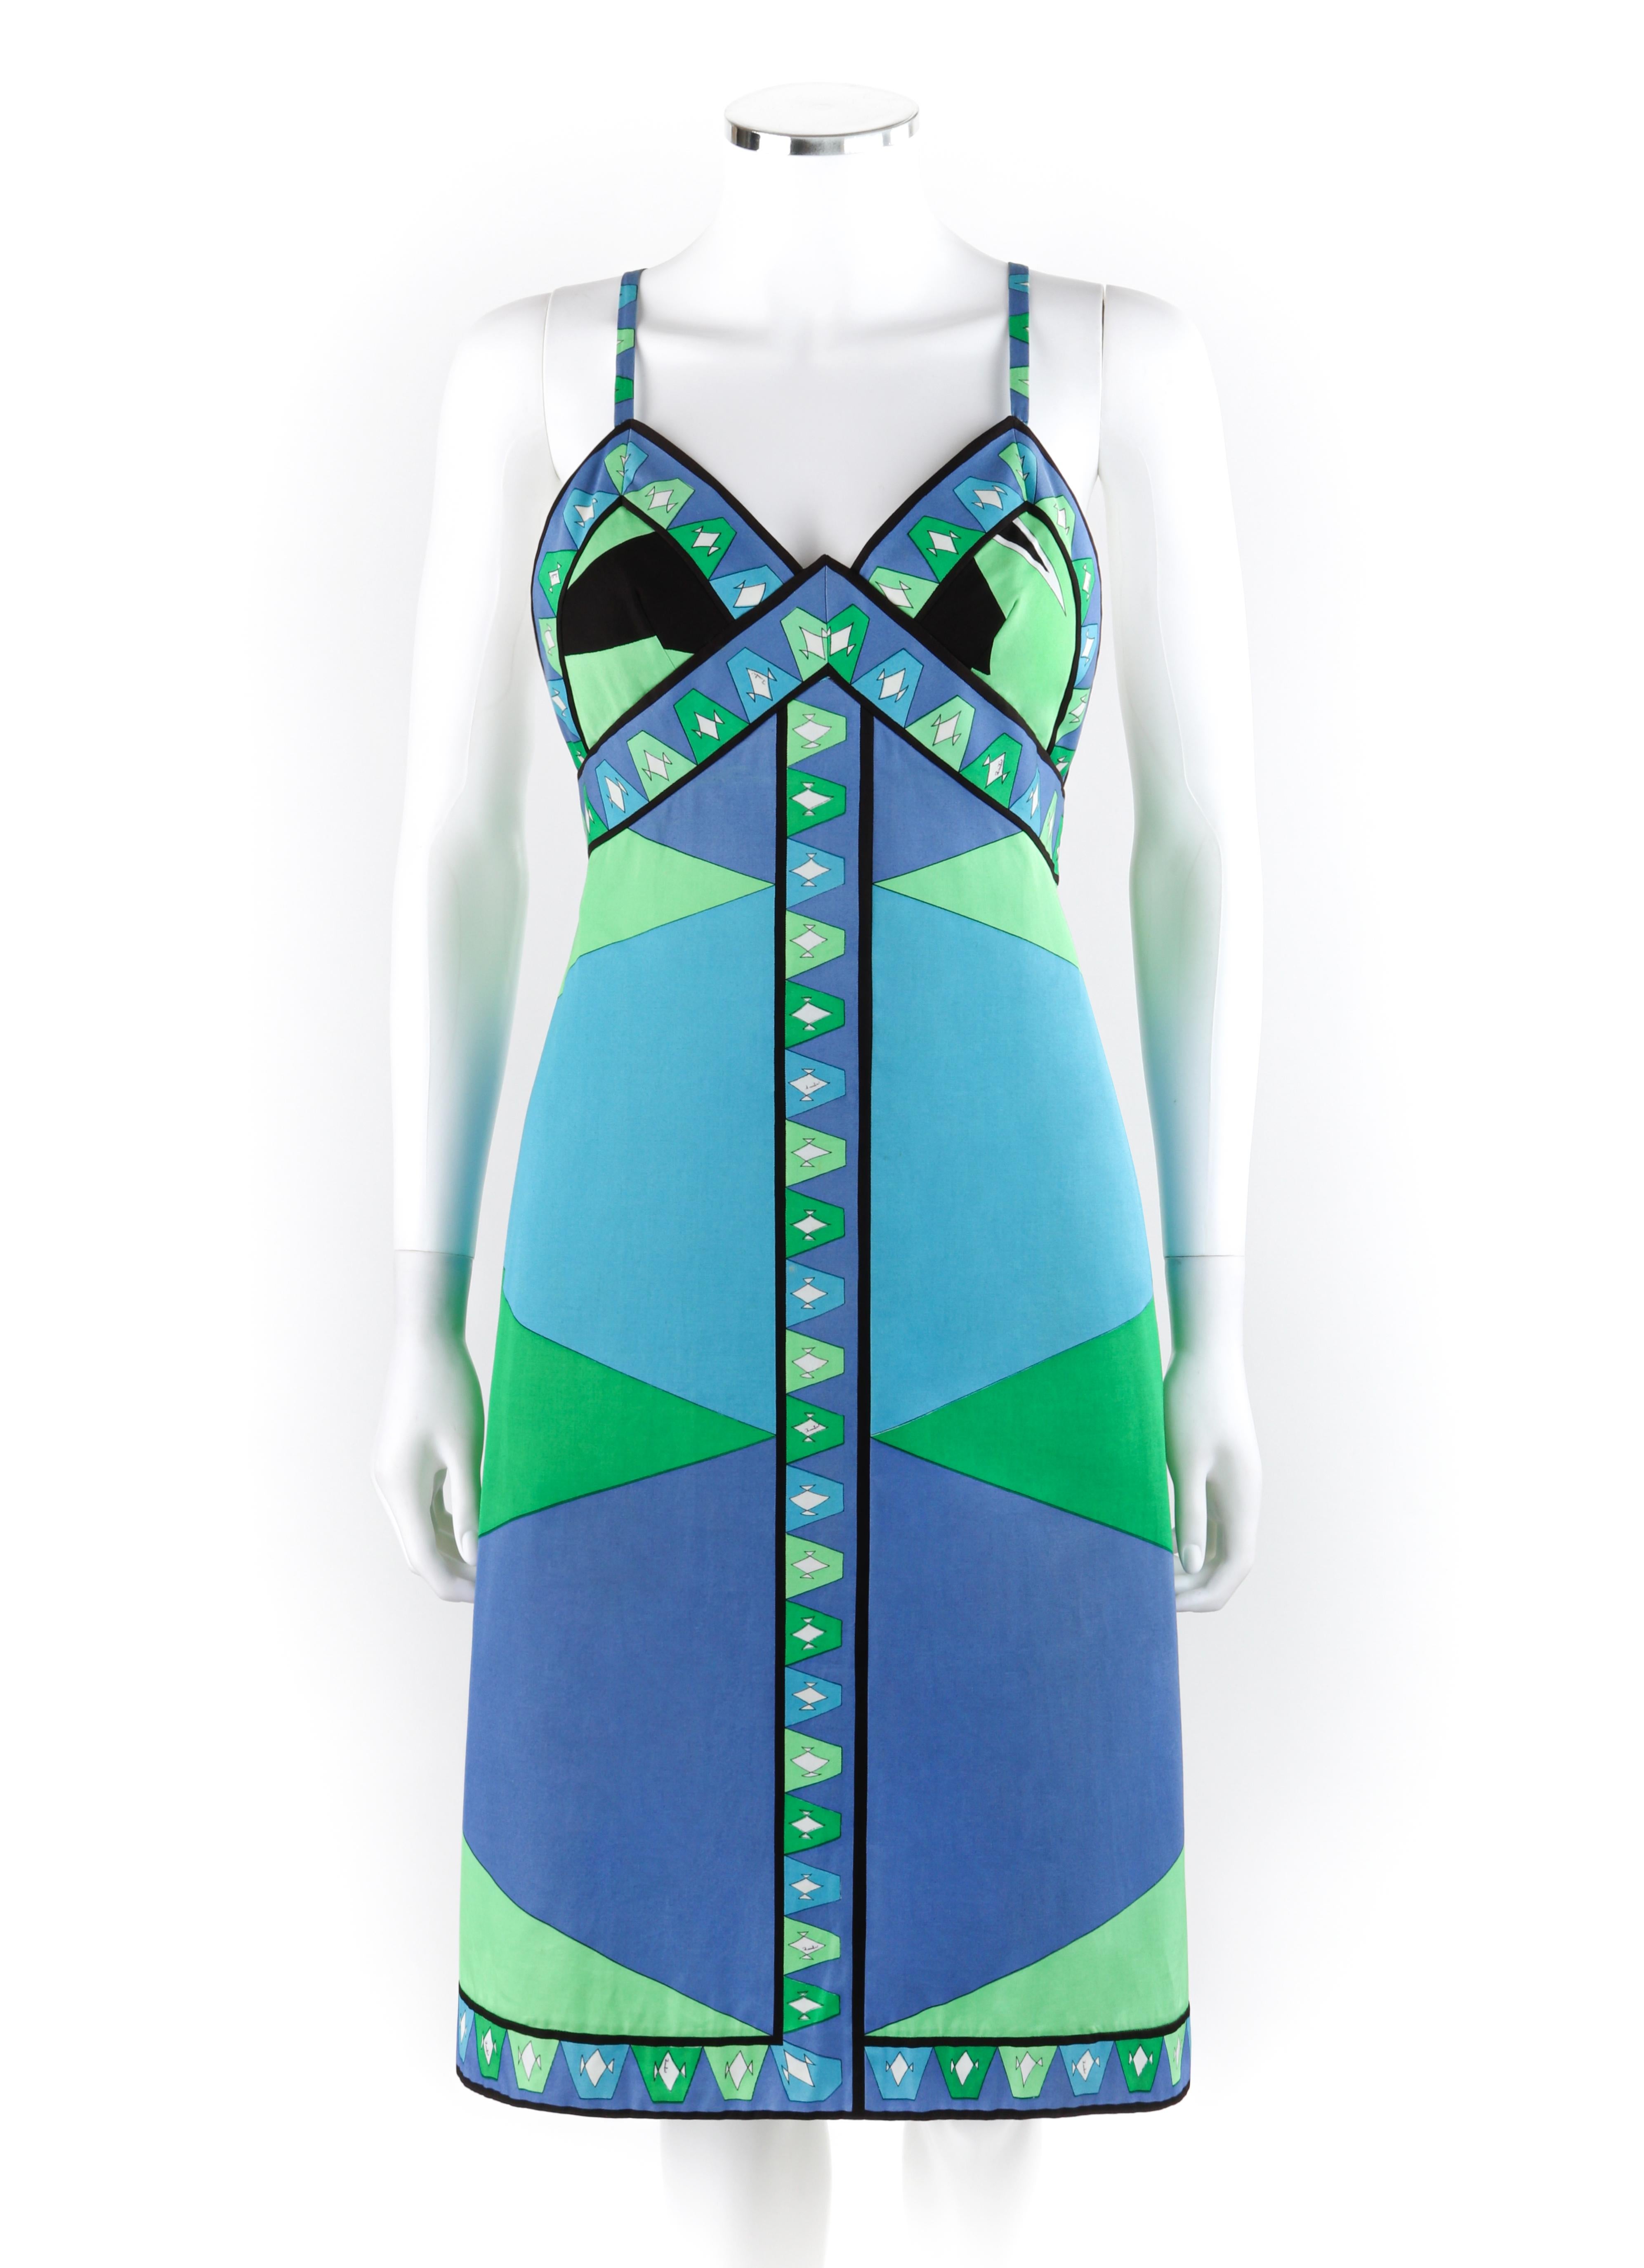 EMILIO PUCCI c.1970s Abstract Geometric Signature Print Spaghetti Strap Sundress
 
Circa: 1970’s
Label(s): Emilio Pucci; Exclusively for Saks Fifth Avenue
Designer: Emilio Pucci
Style: Sundress
Color(s): Shades of blue, green, turquoise, black,